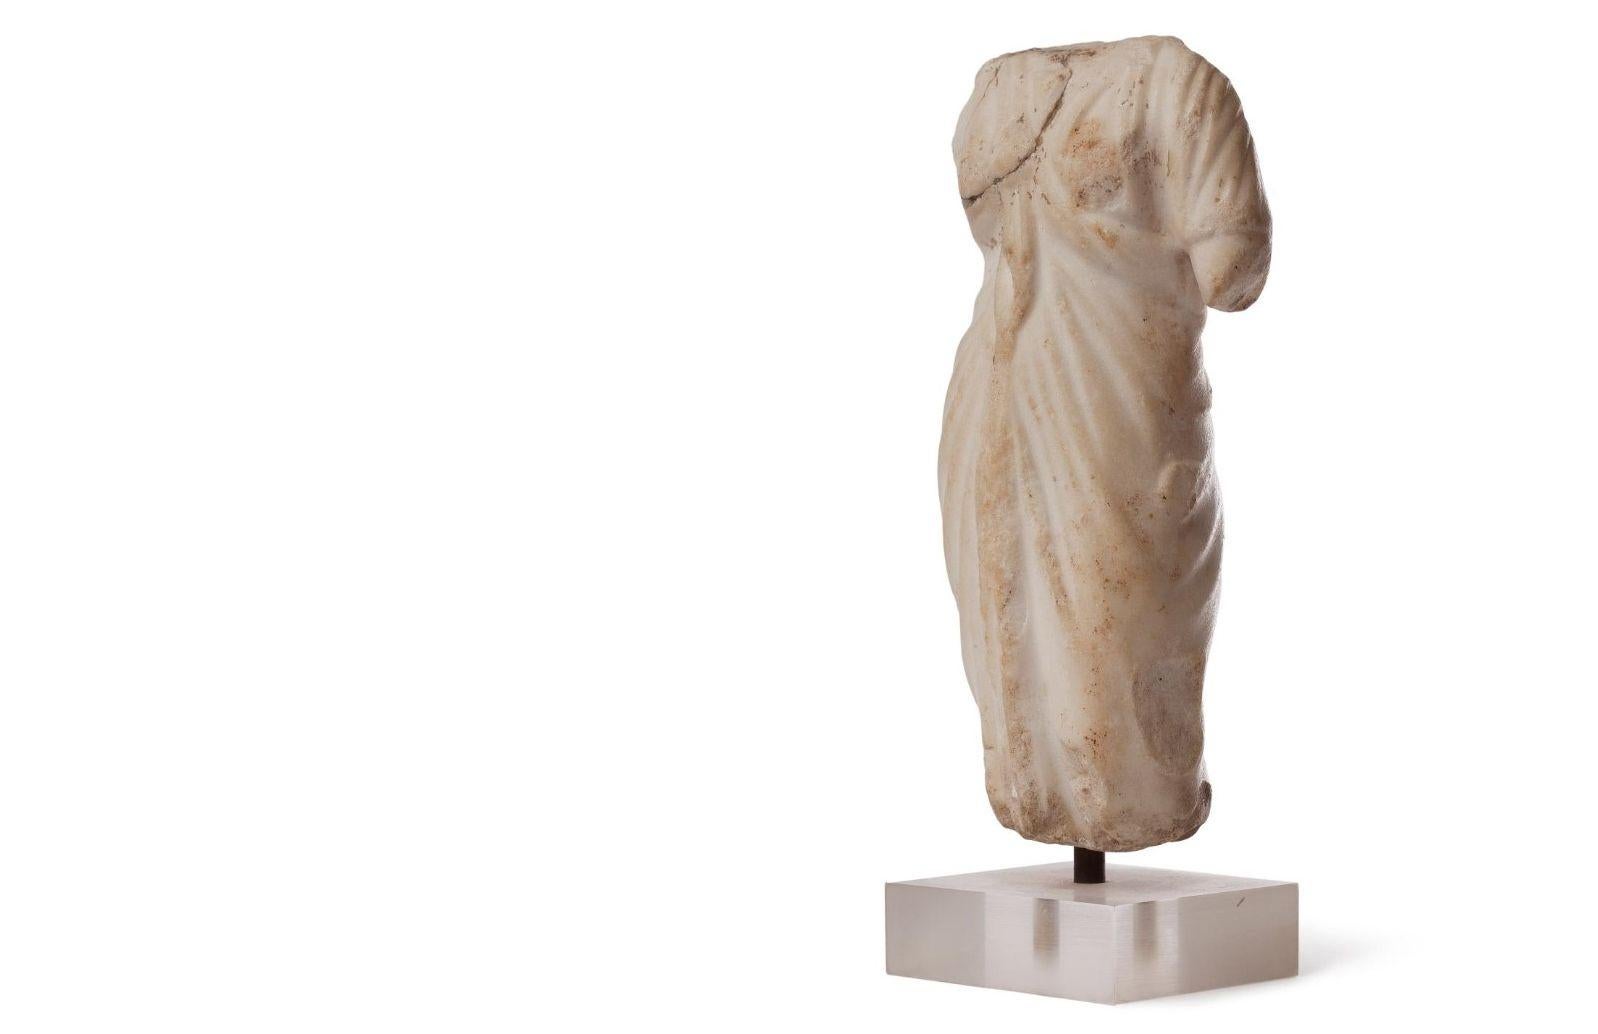 Beautiful Roman Oriental marble torso, most possibly depicting the Goddess Venus, draped with a Himation, the Greek Toga. Small defect on right shoulder.
Beautiful accent piece.
2nd-3rd century AD, Roman Oriental Provinces. A certificate by